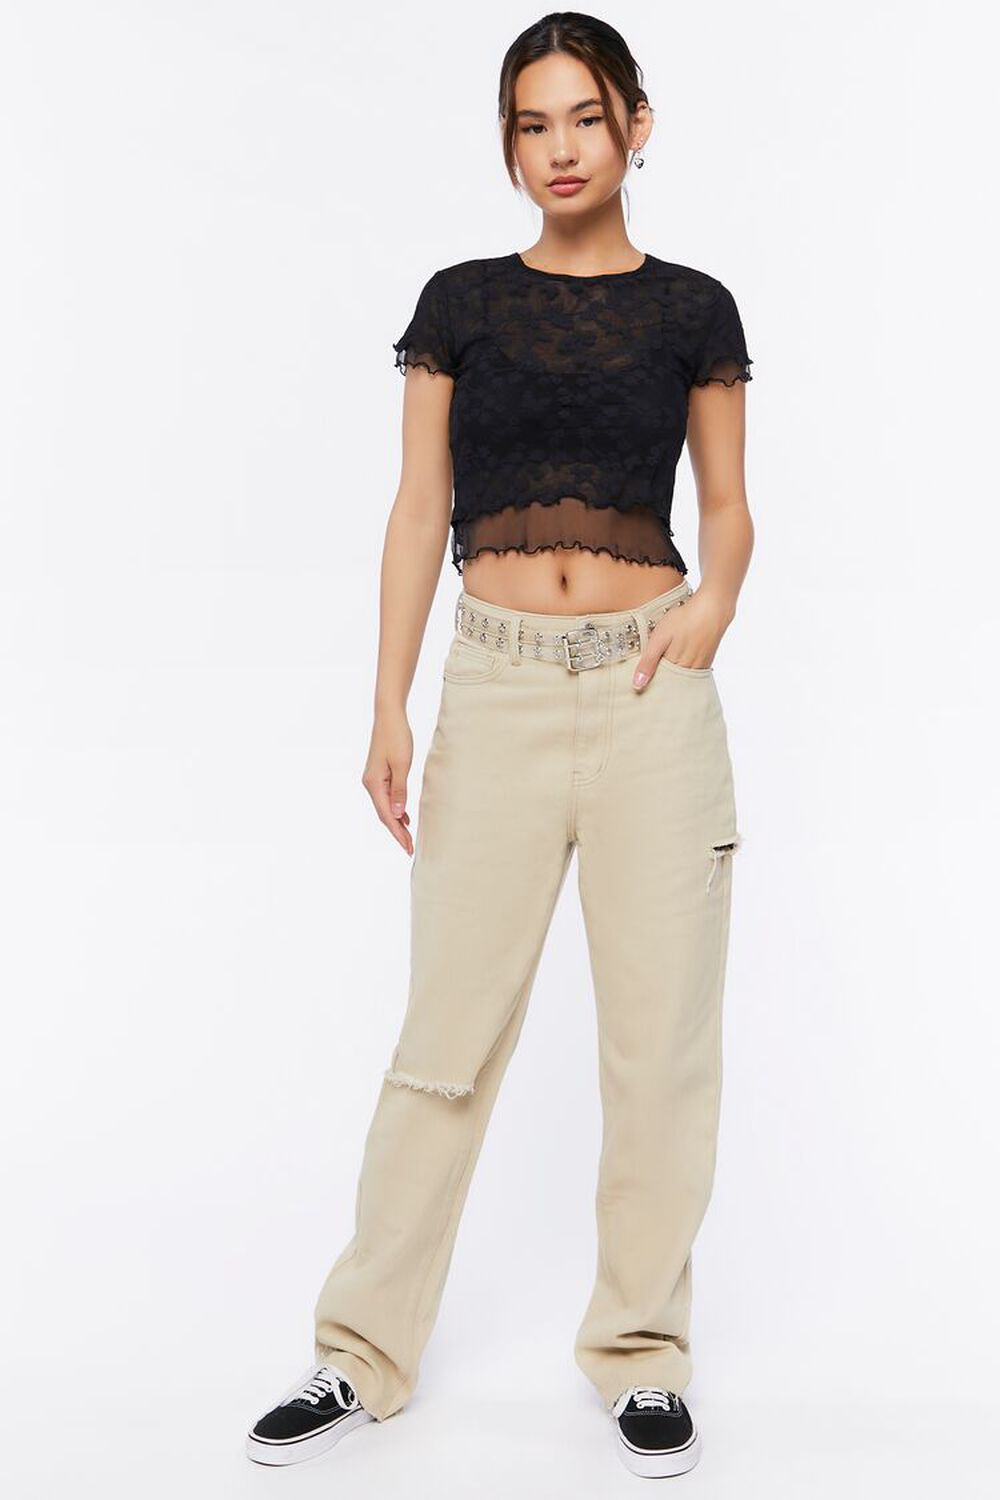 Floral Lace Mesh Cropped Baby Tee